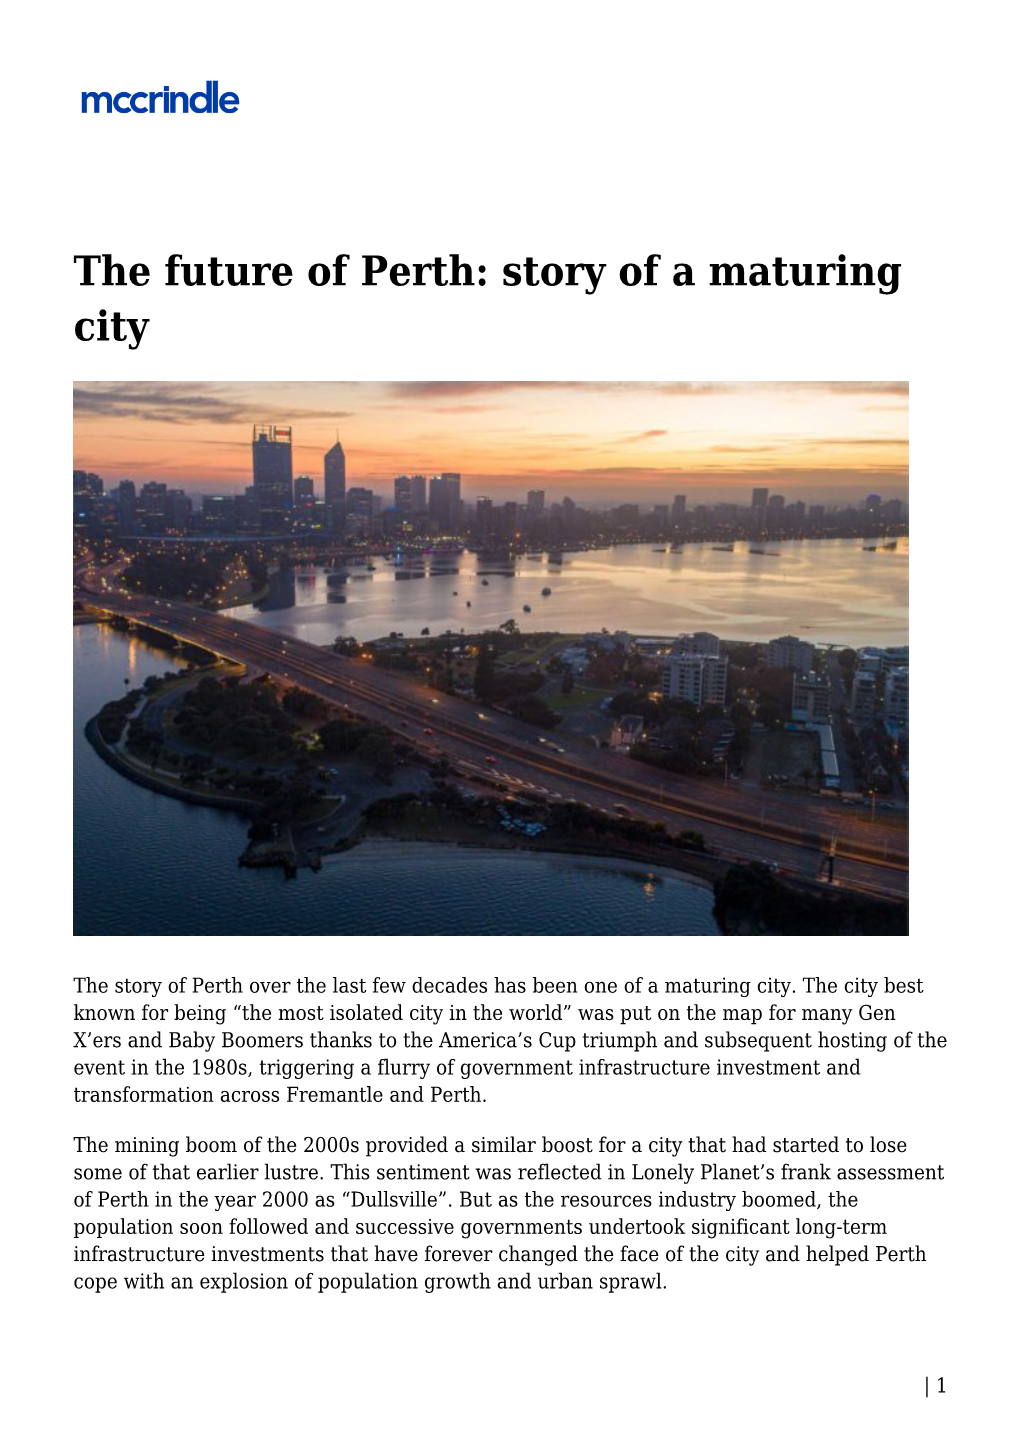 The Future of Perth: Story of a Maturing City